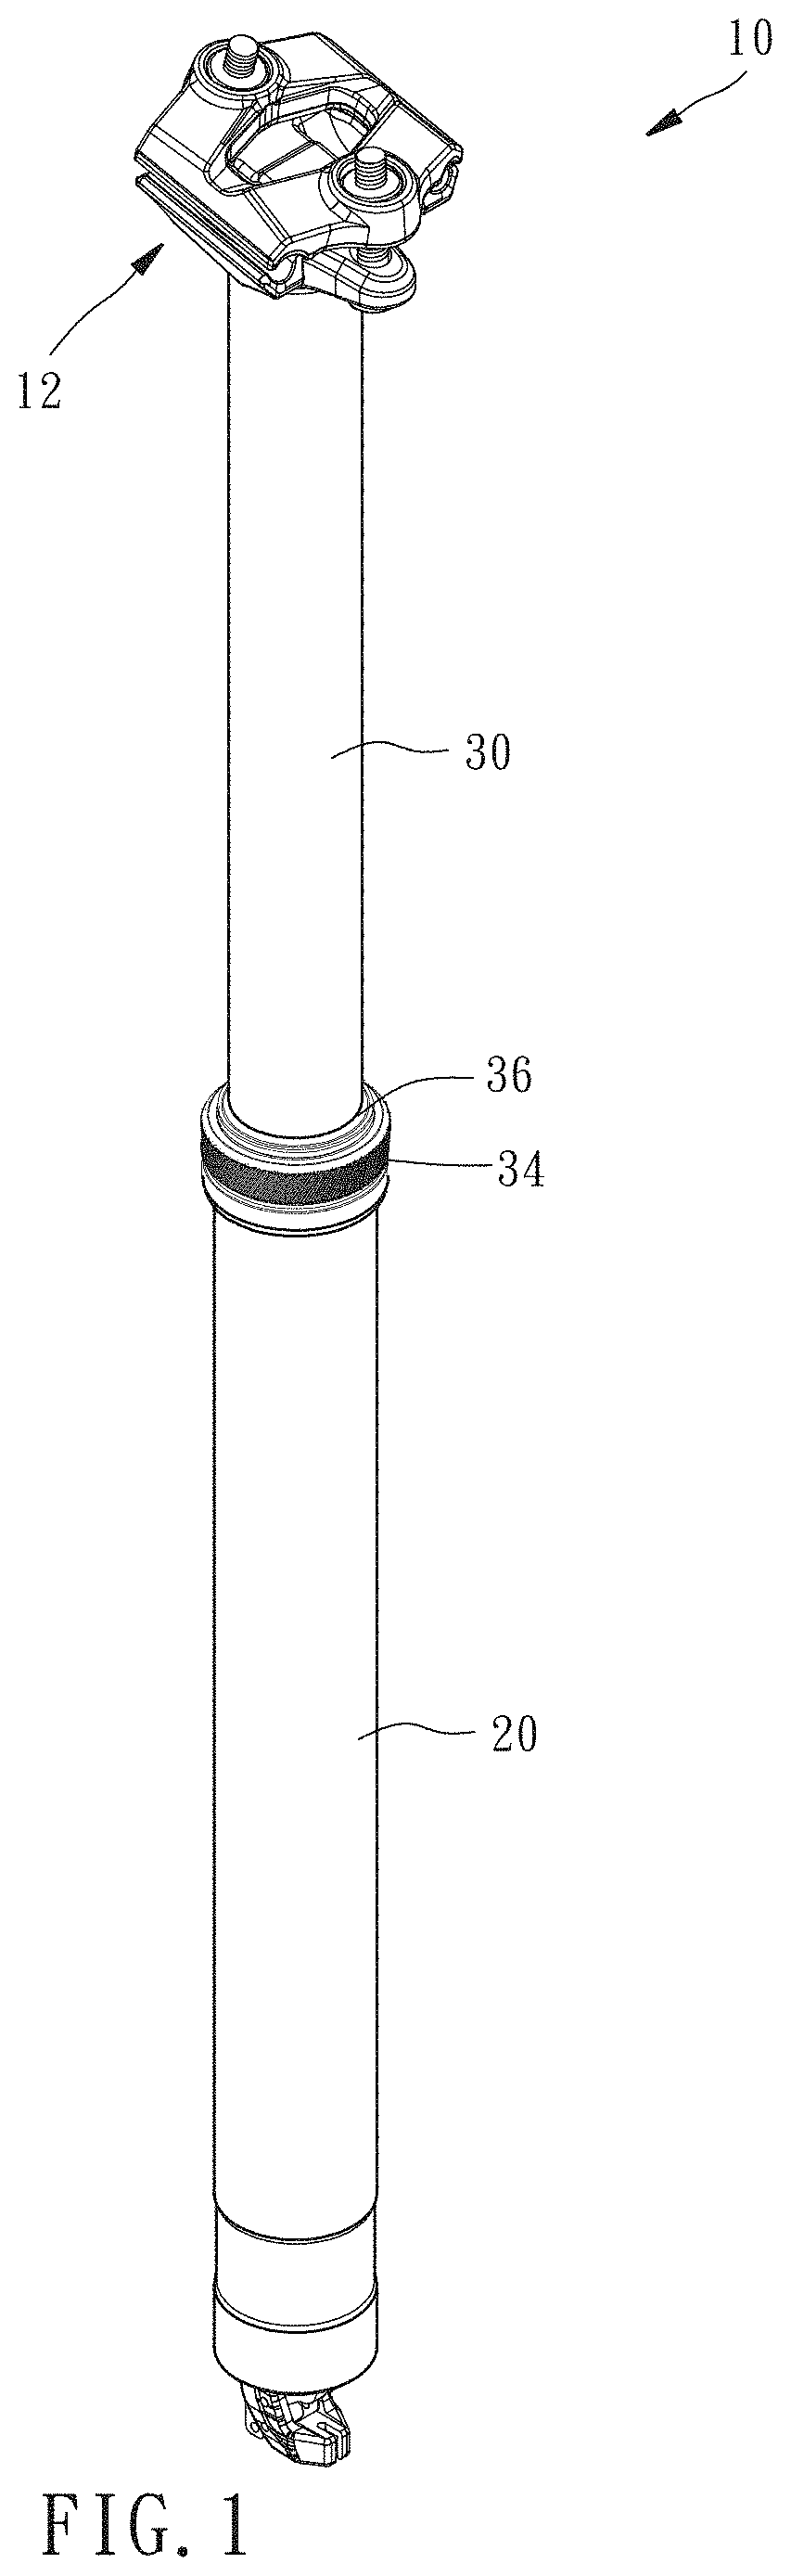 Seat post assembly capable of adjusting total height